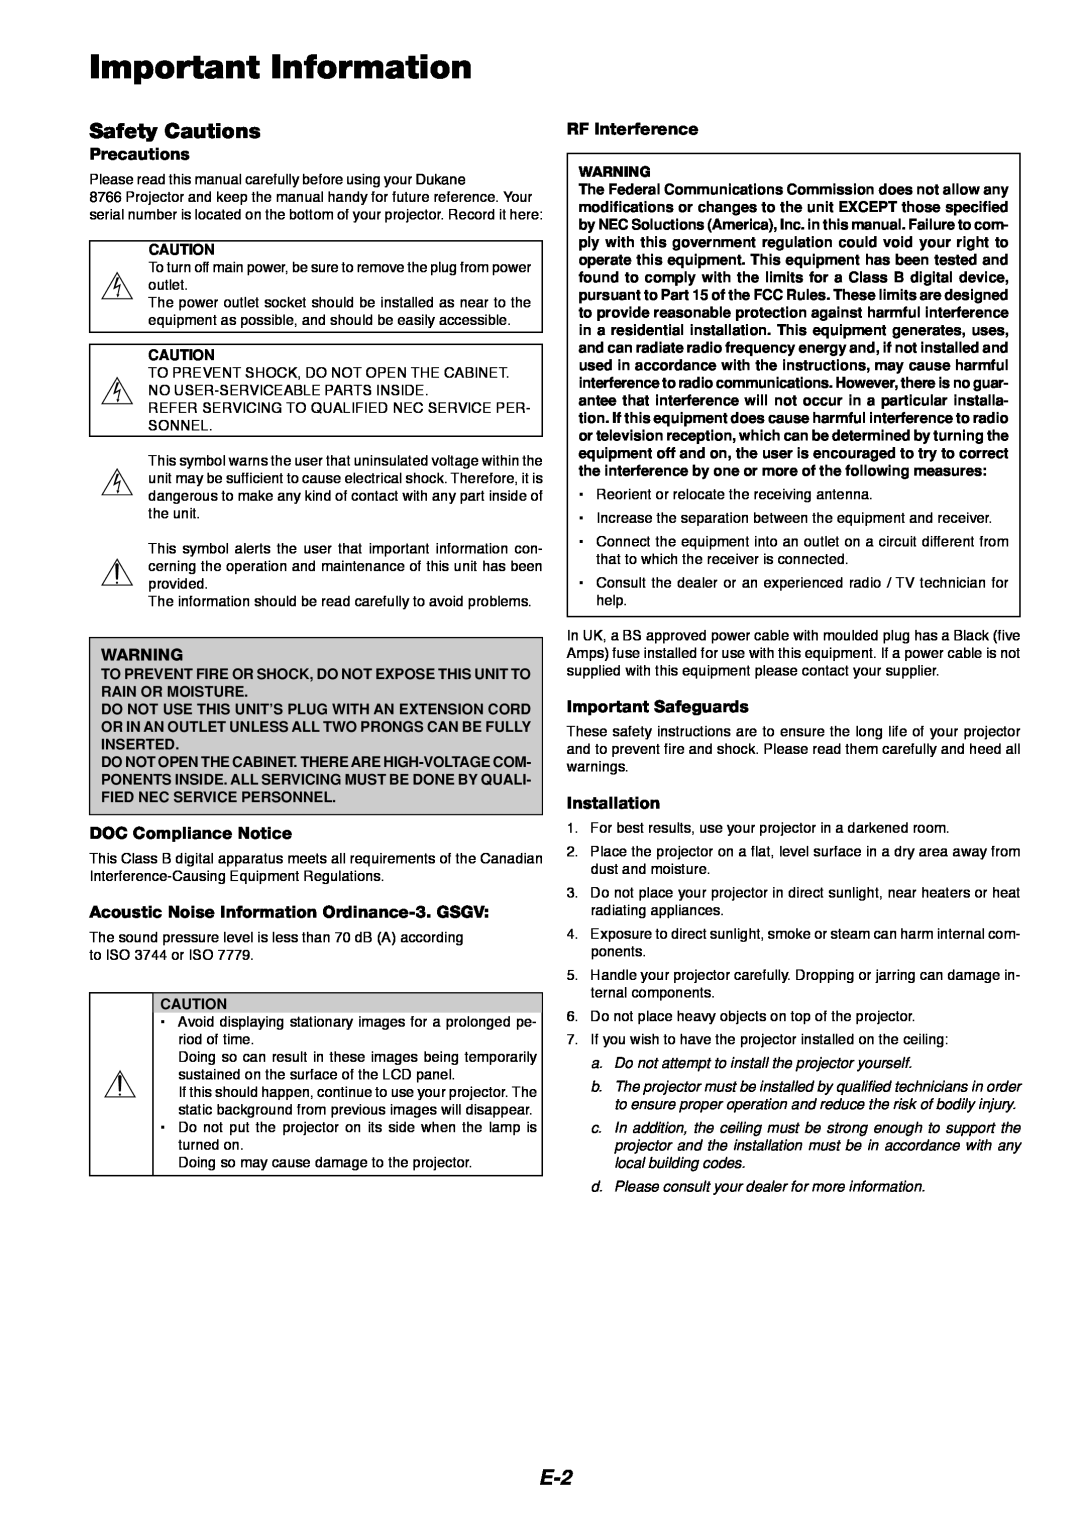 Dukane 8766 Important Information, Safety Cautions, Precautions, DOC Compliance Notice, RF Interference, Installation 